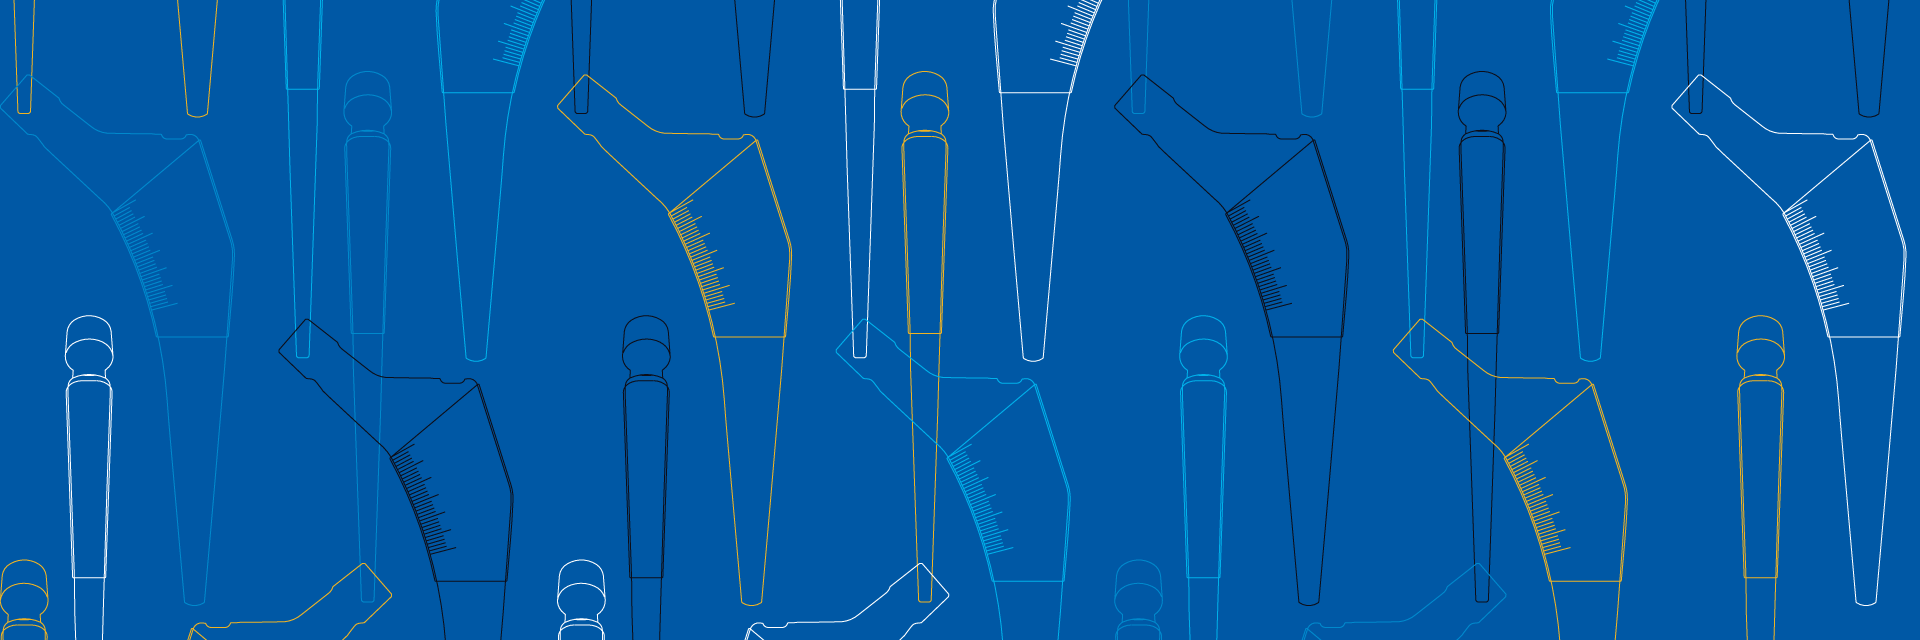 OrthoView template outlines of different hip implants repeated on a blue background.